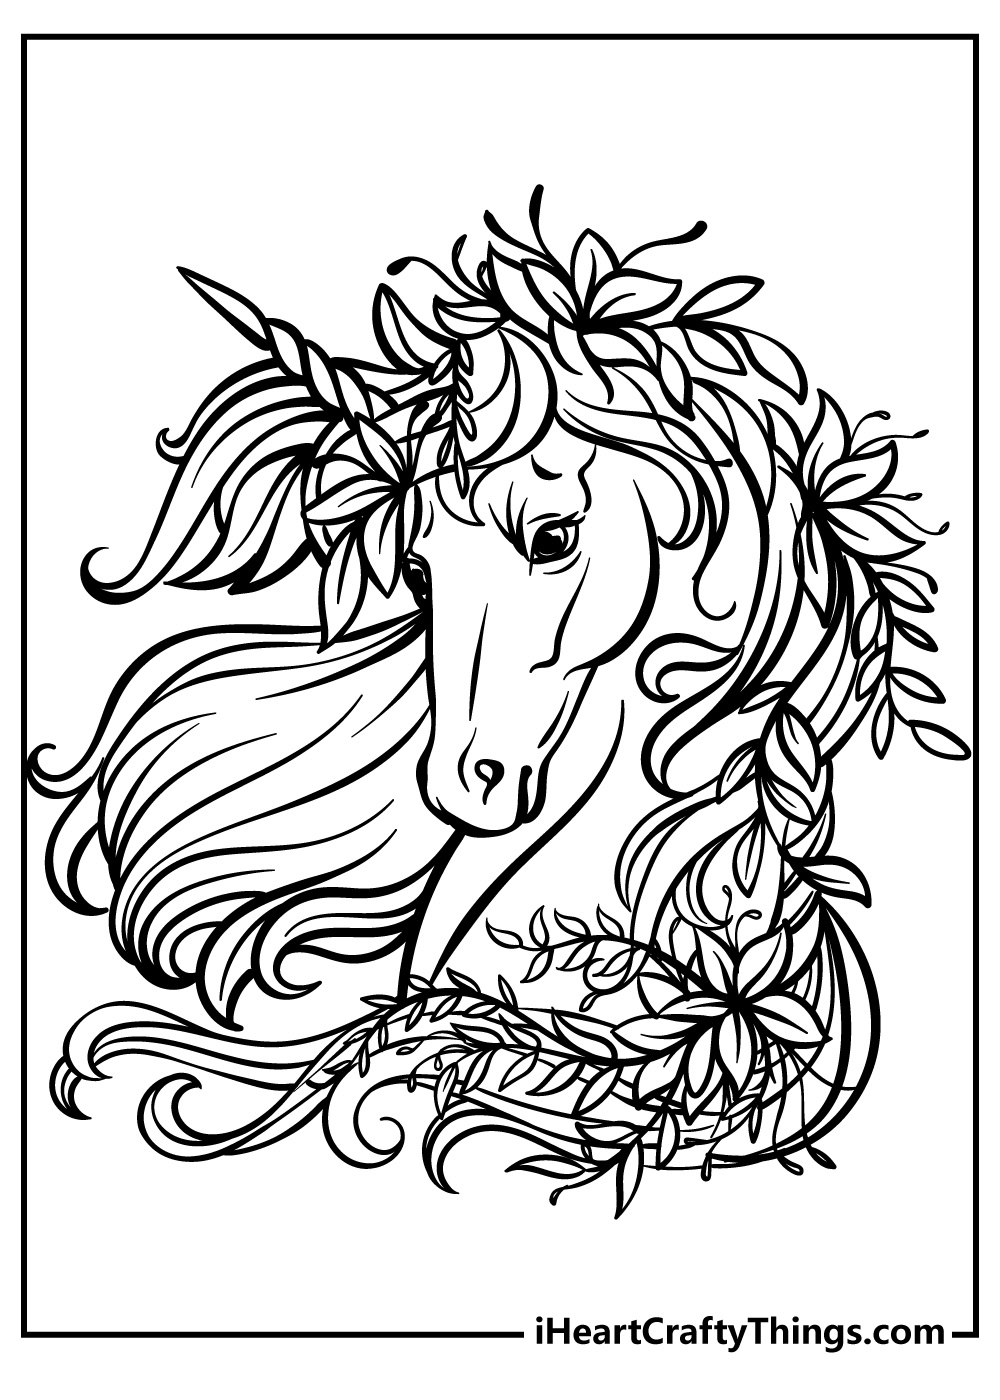 Printable Adult Coloring Pages 